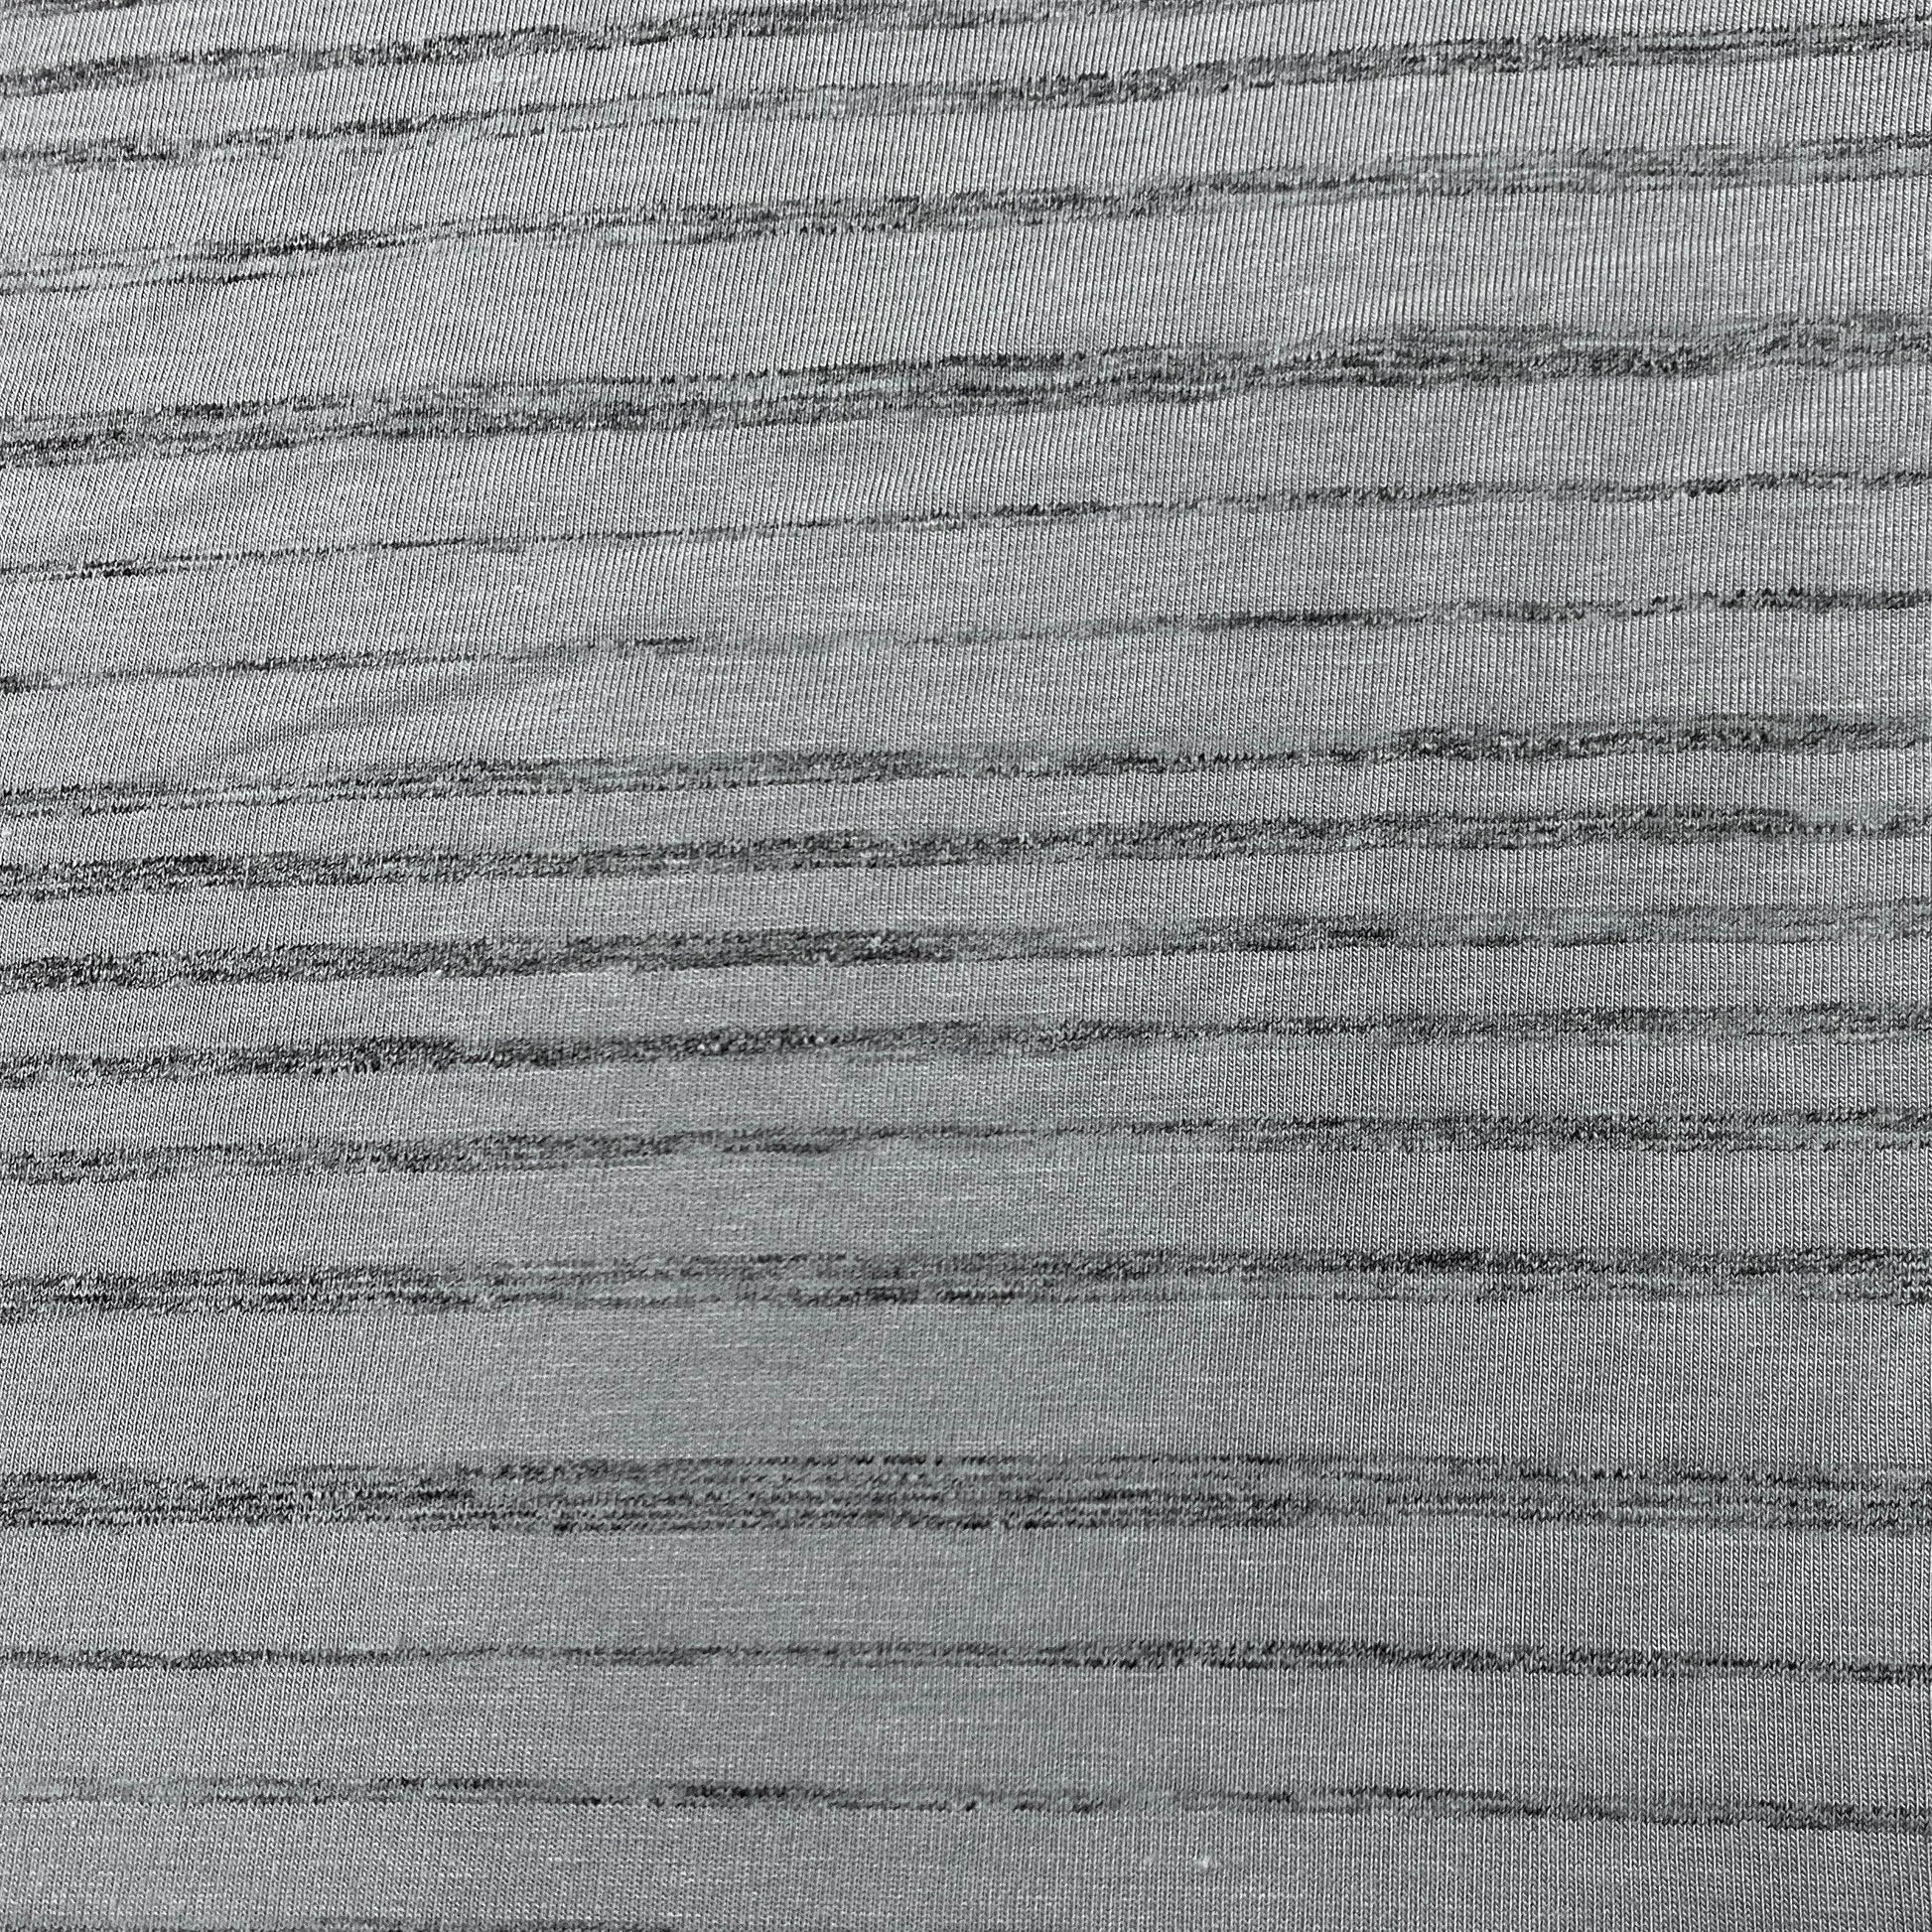 Slate Blue and Gray Stripes on Bamboo/Spandex Jersey Fabric - Nature's Fabrics